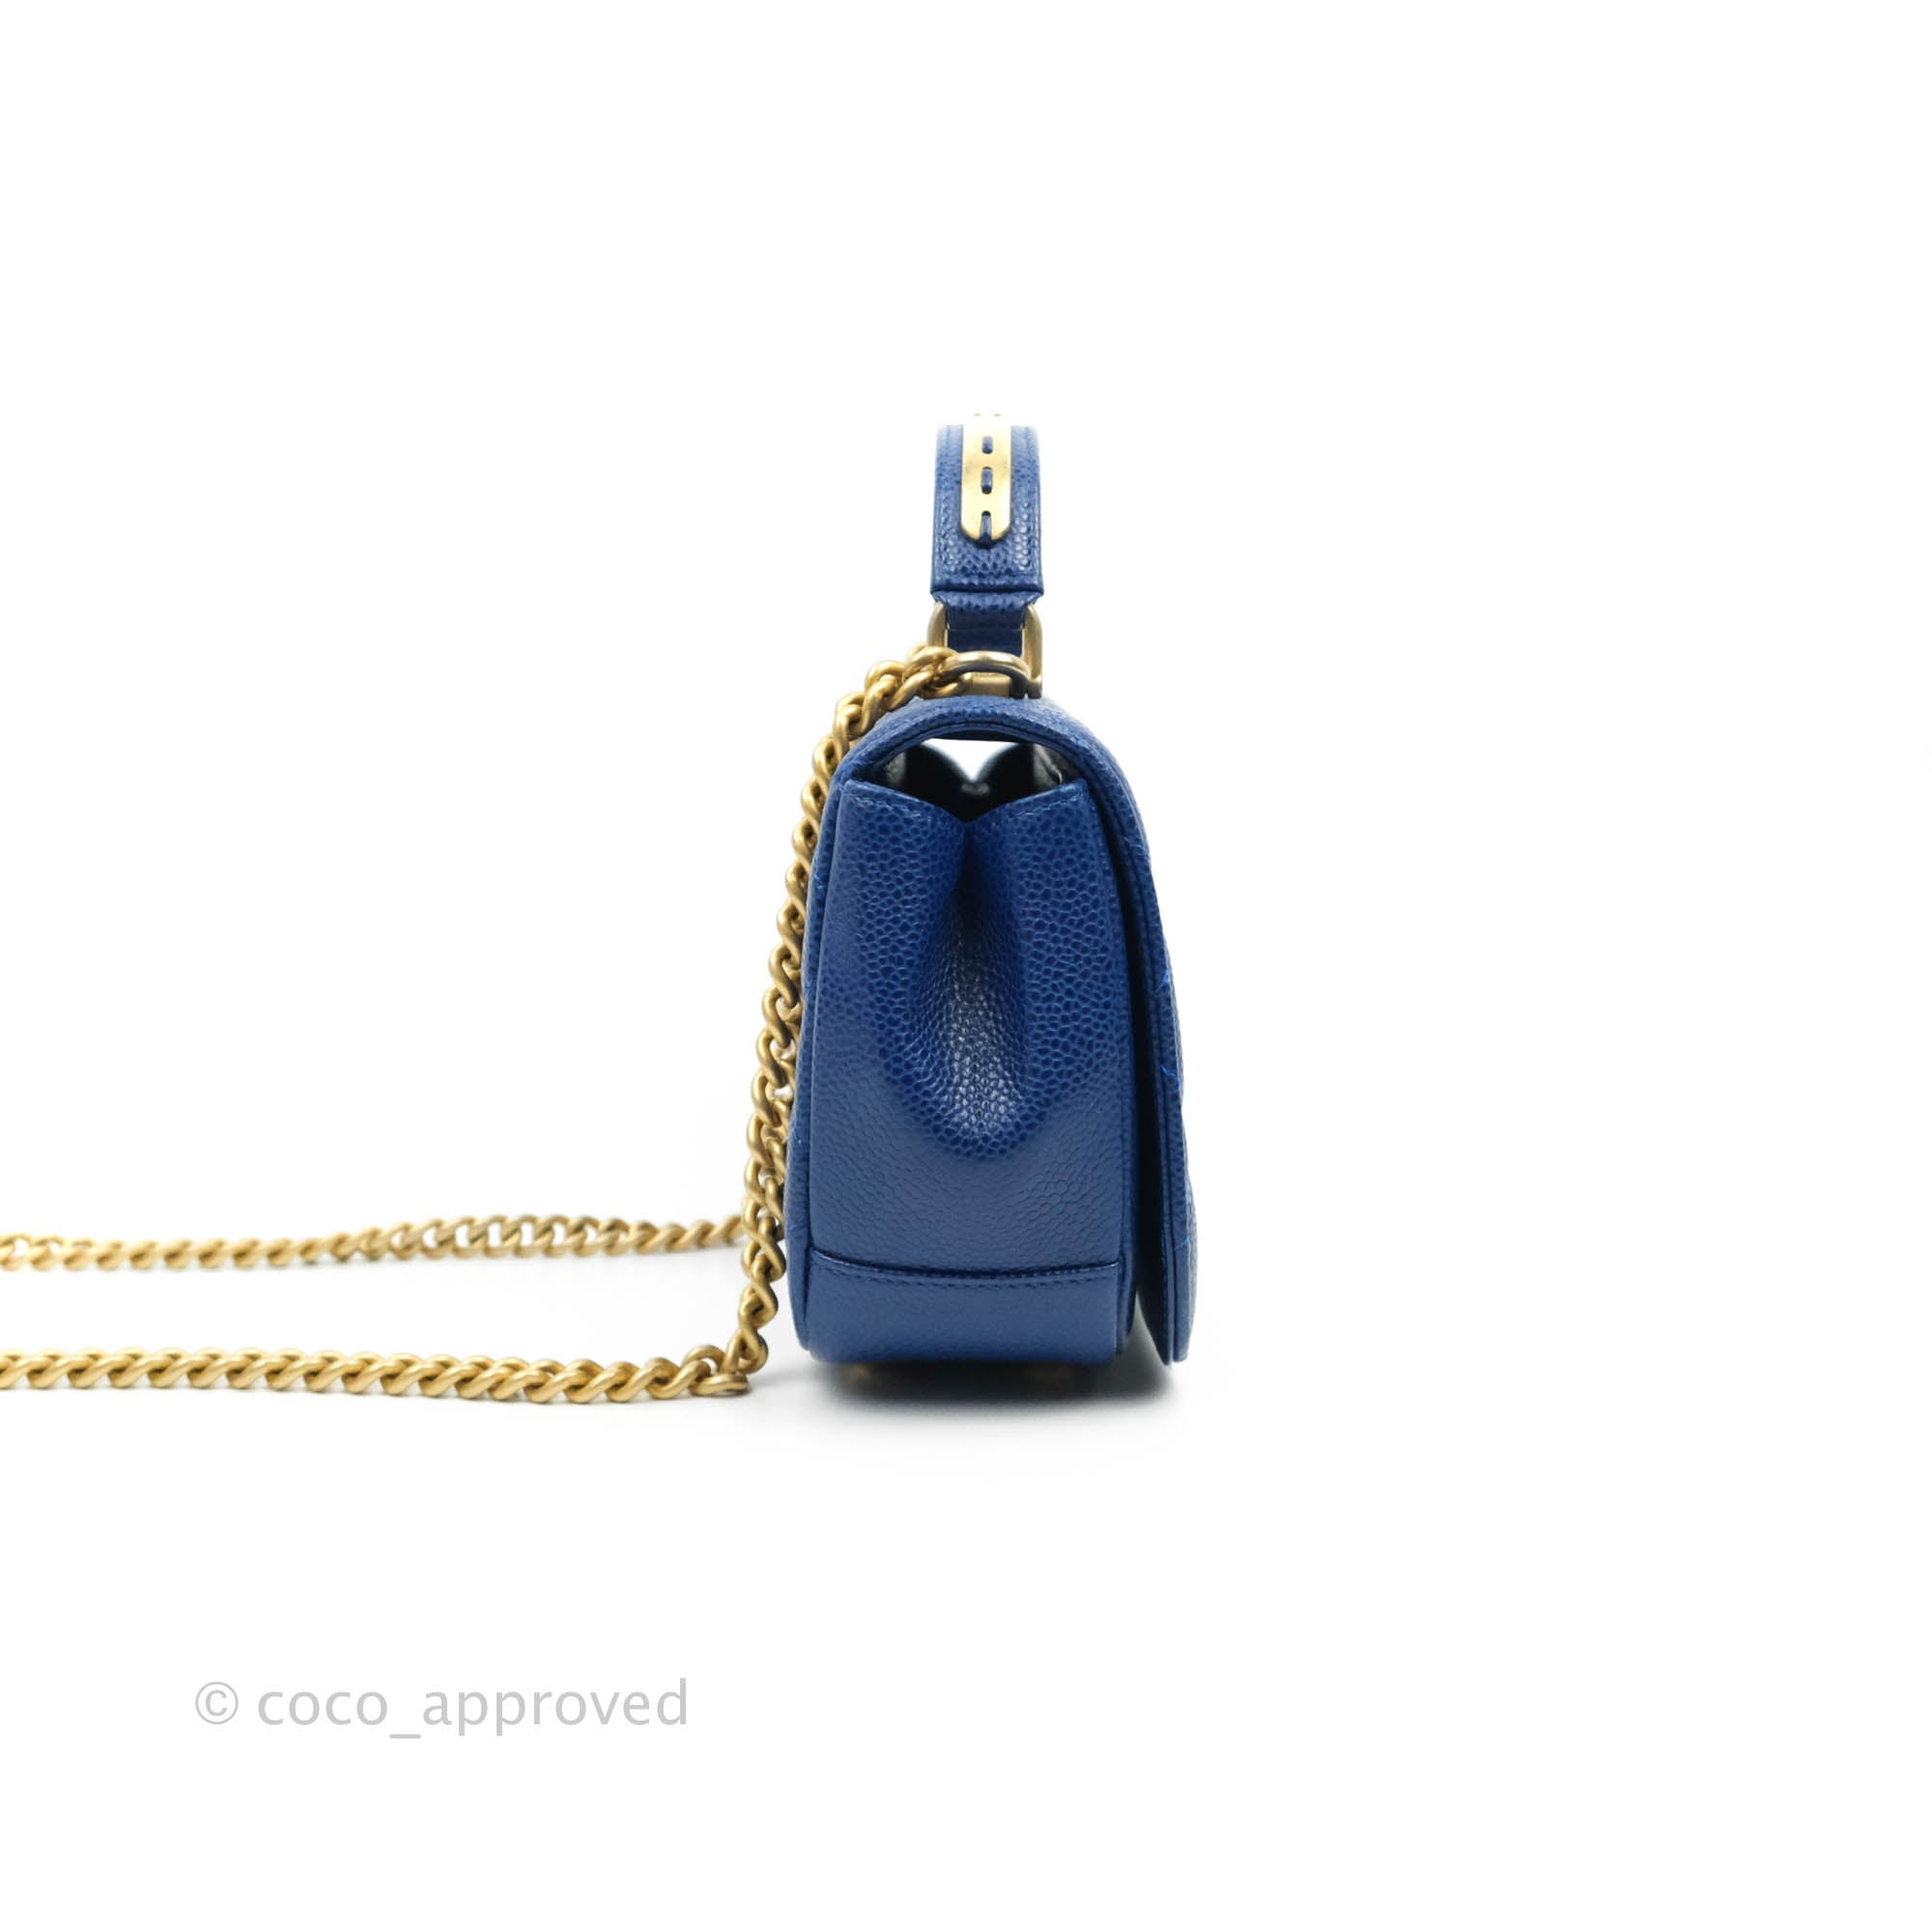 What Goes Around Comes Around Chanel Mini Barrel Bag in Blue